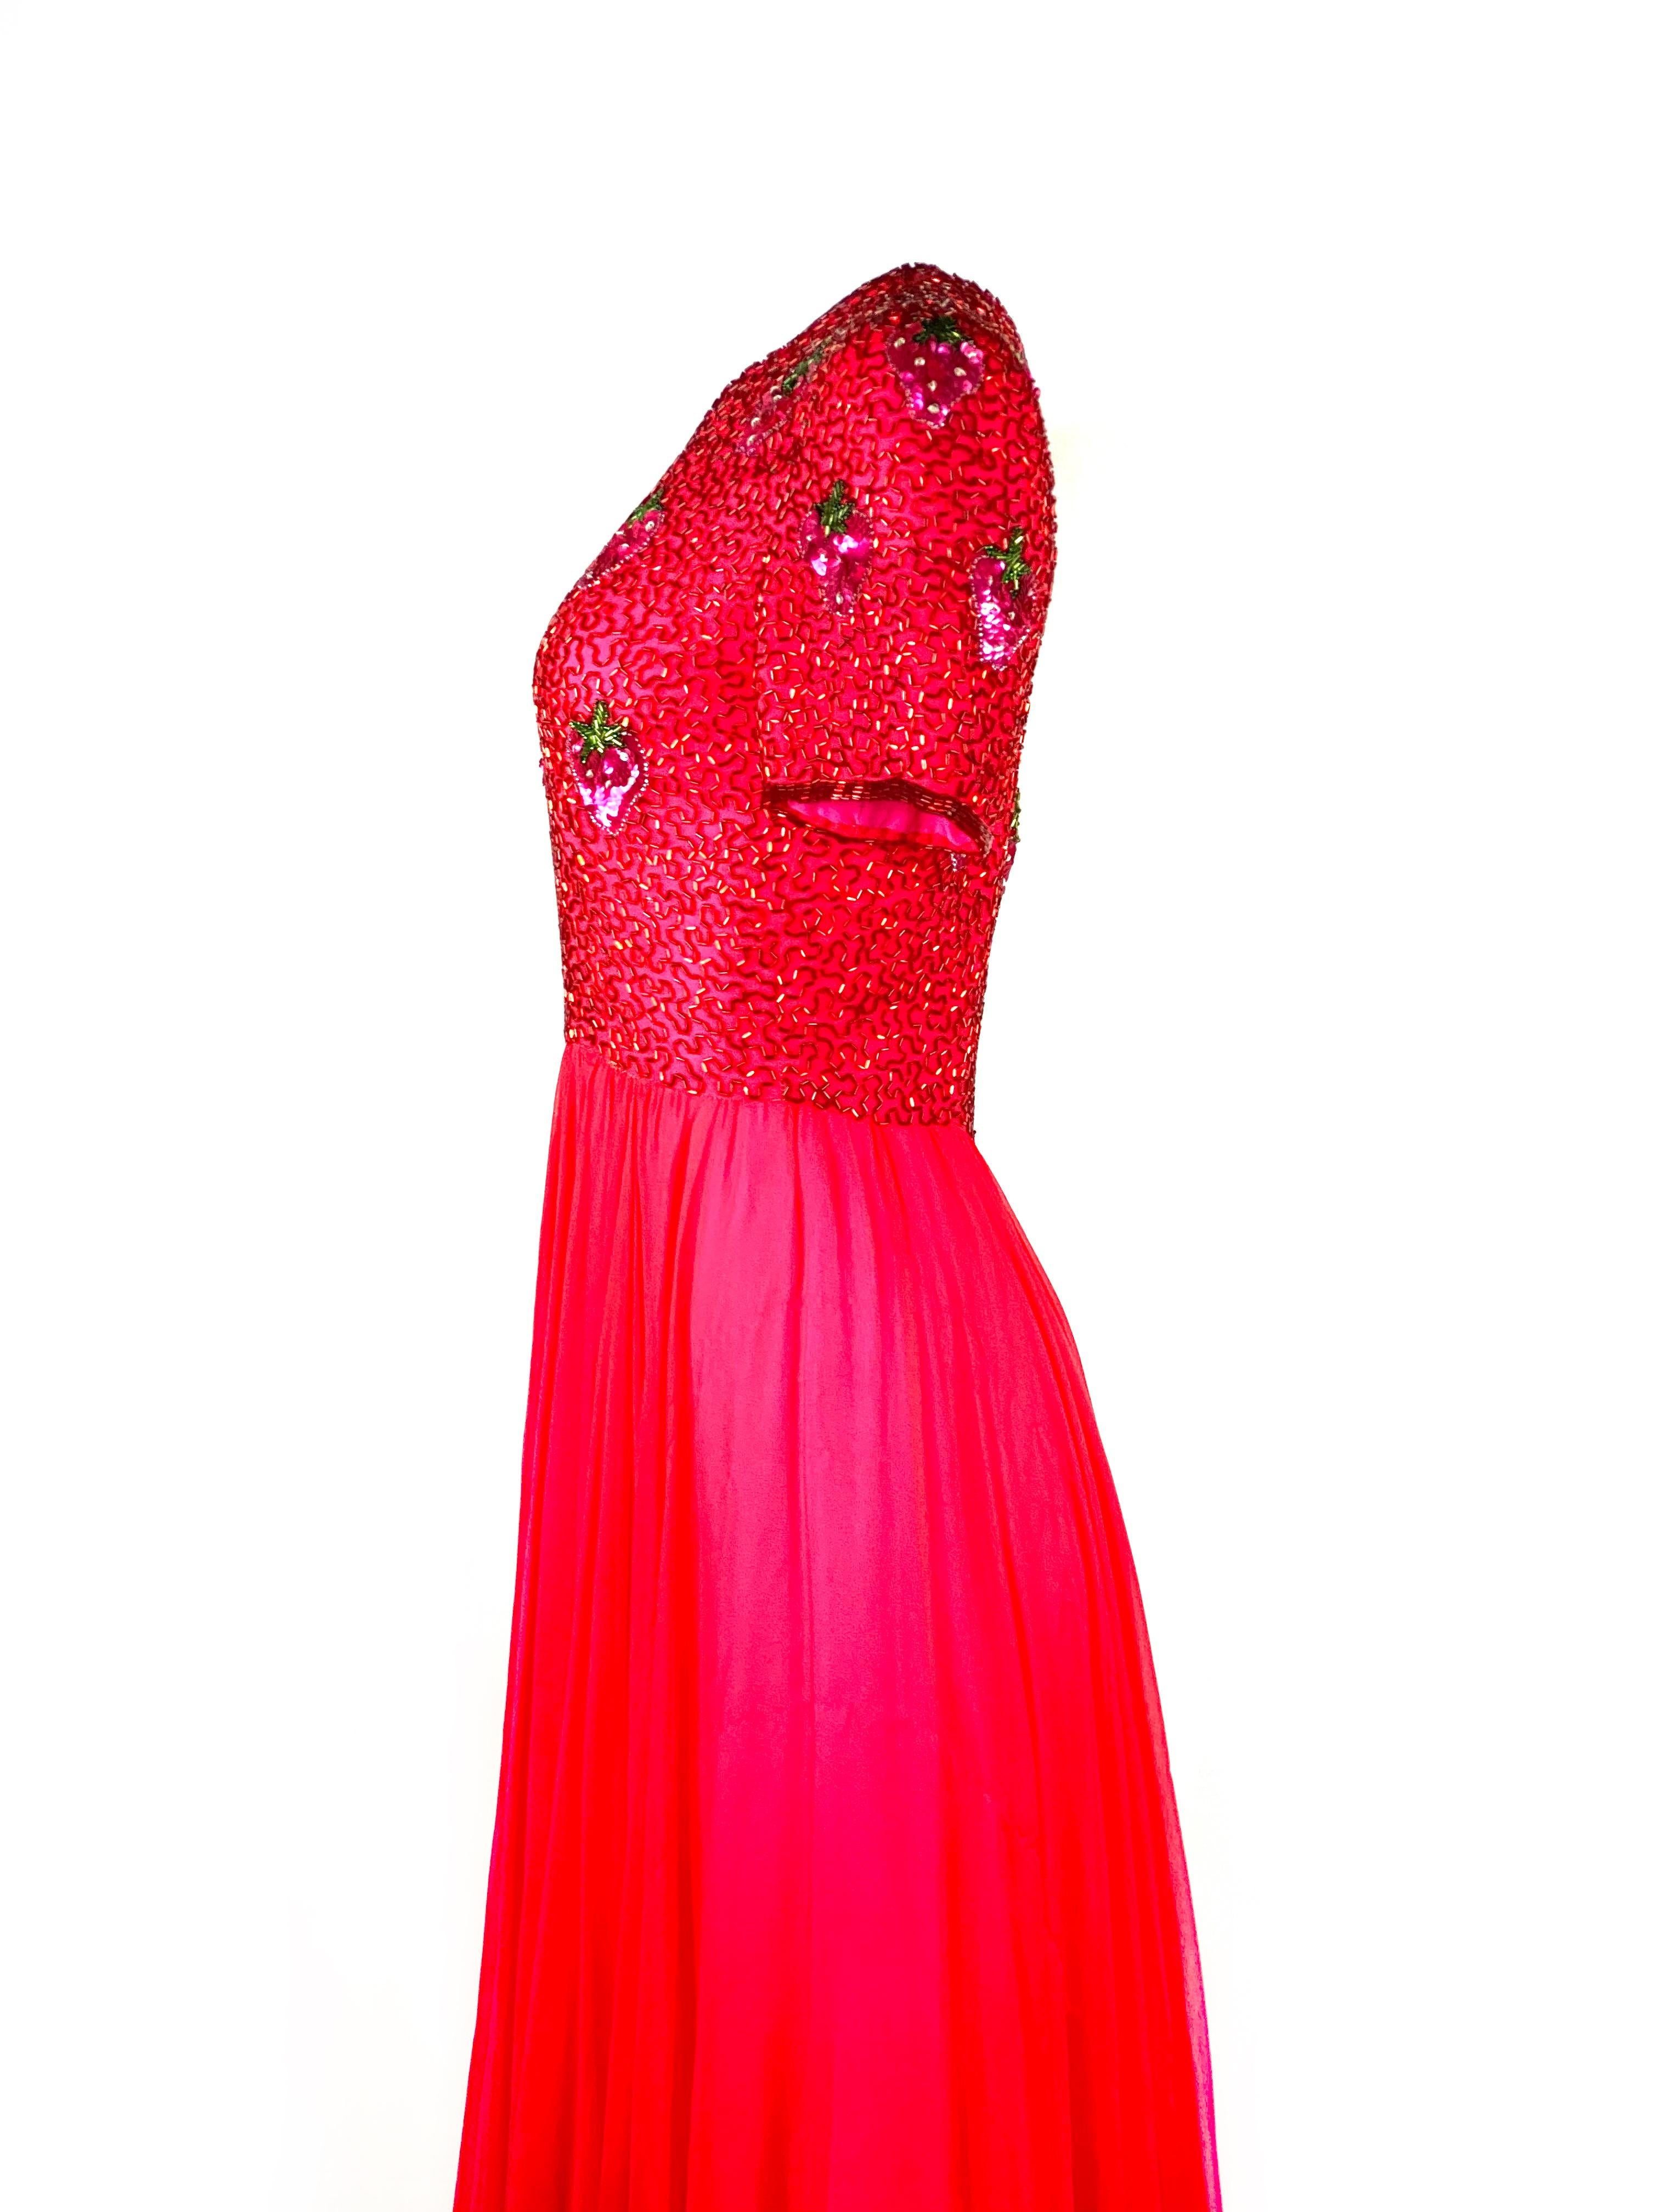 Women's Vintage BOB MACKIE Red and Pink Strawberry Maxi Evening Dress Gown Size 10